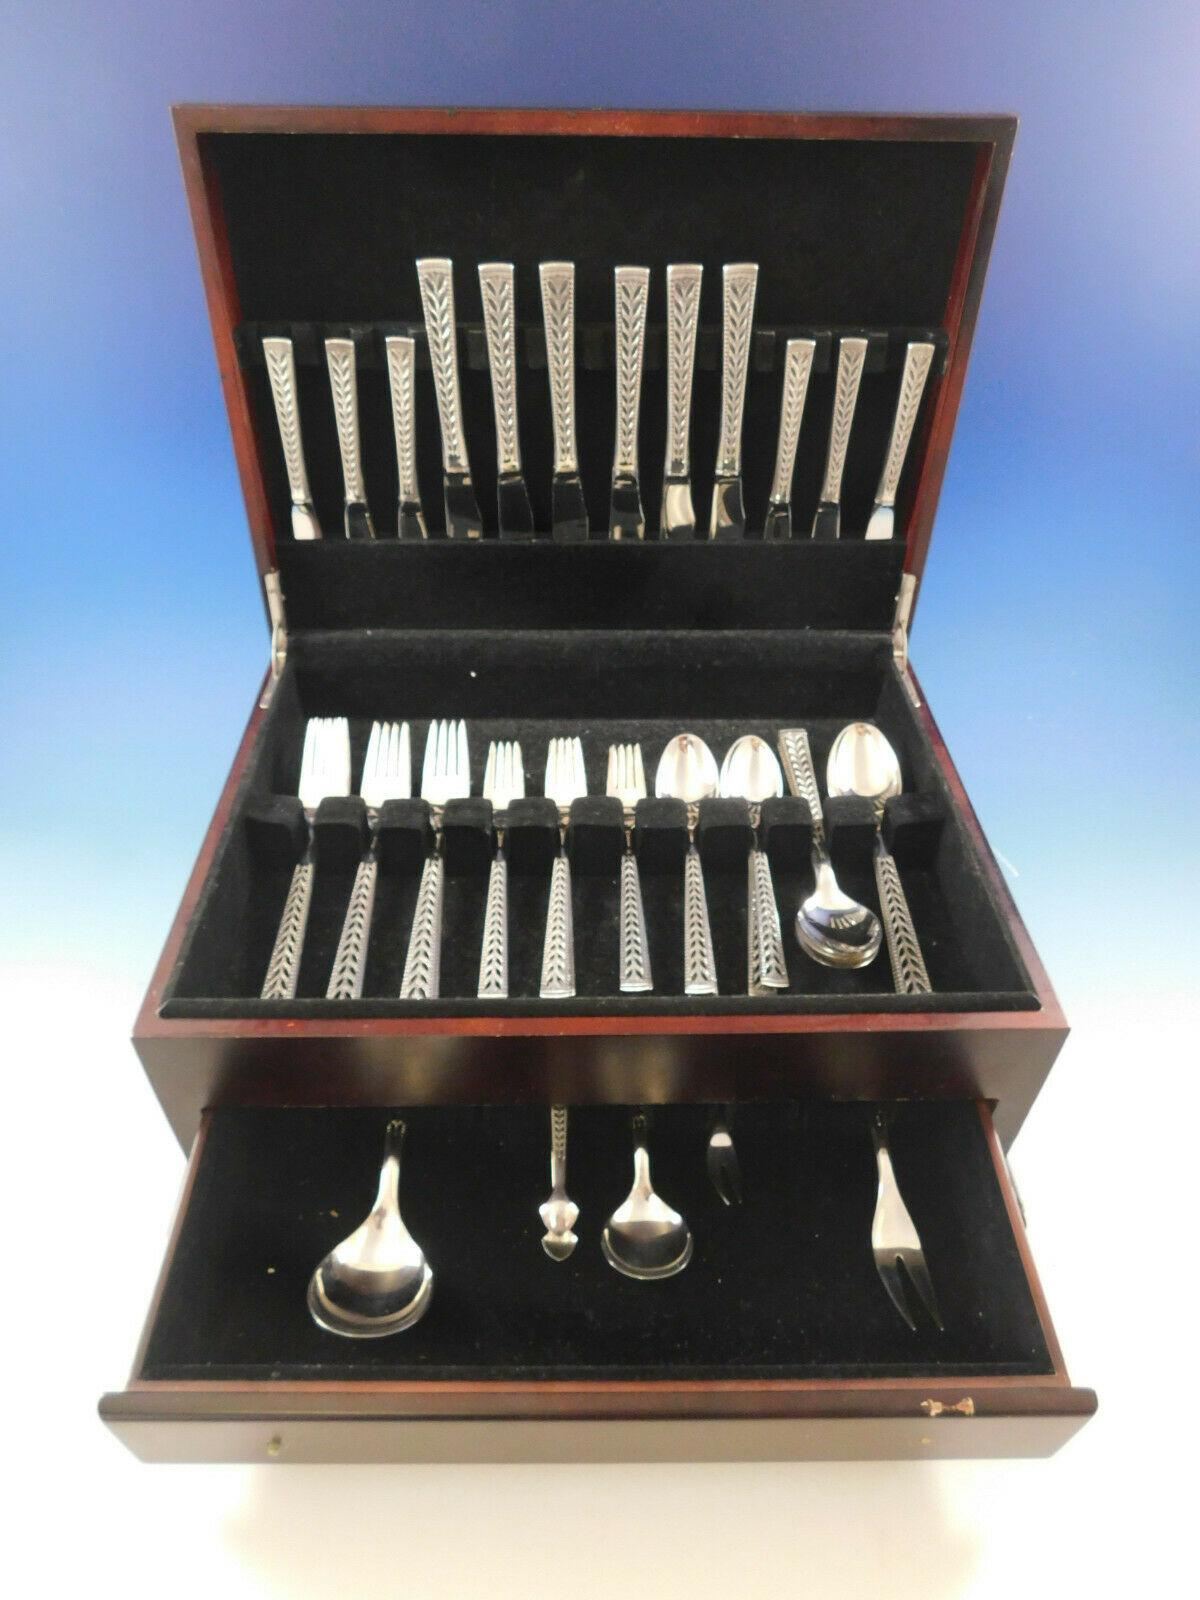 Juvel by Nils Hansen 830 Silver flatware set featuring a unique pierced handle - 41 pieces. This set includes:

6 dinner knives, 8